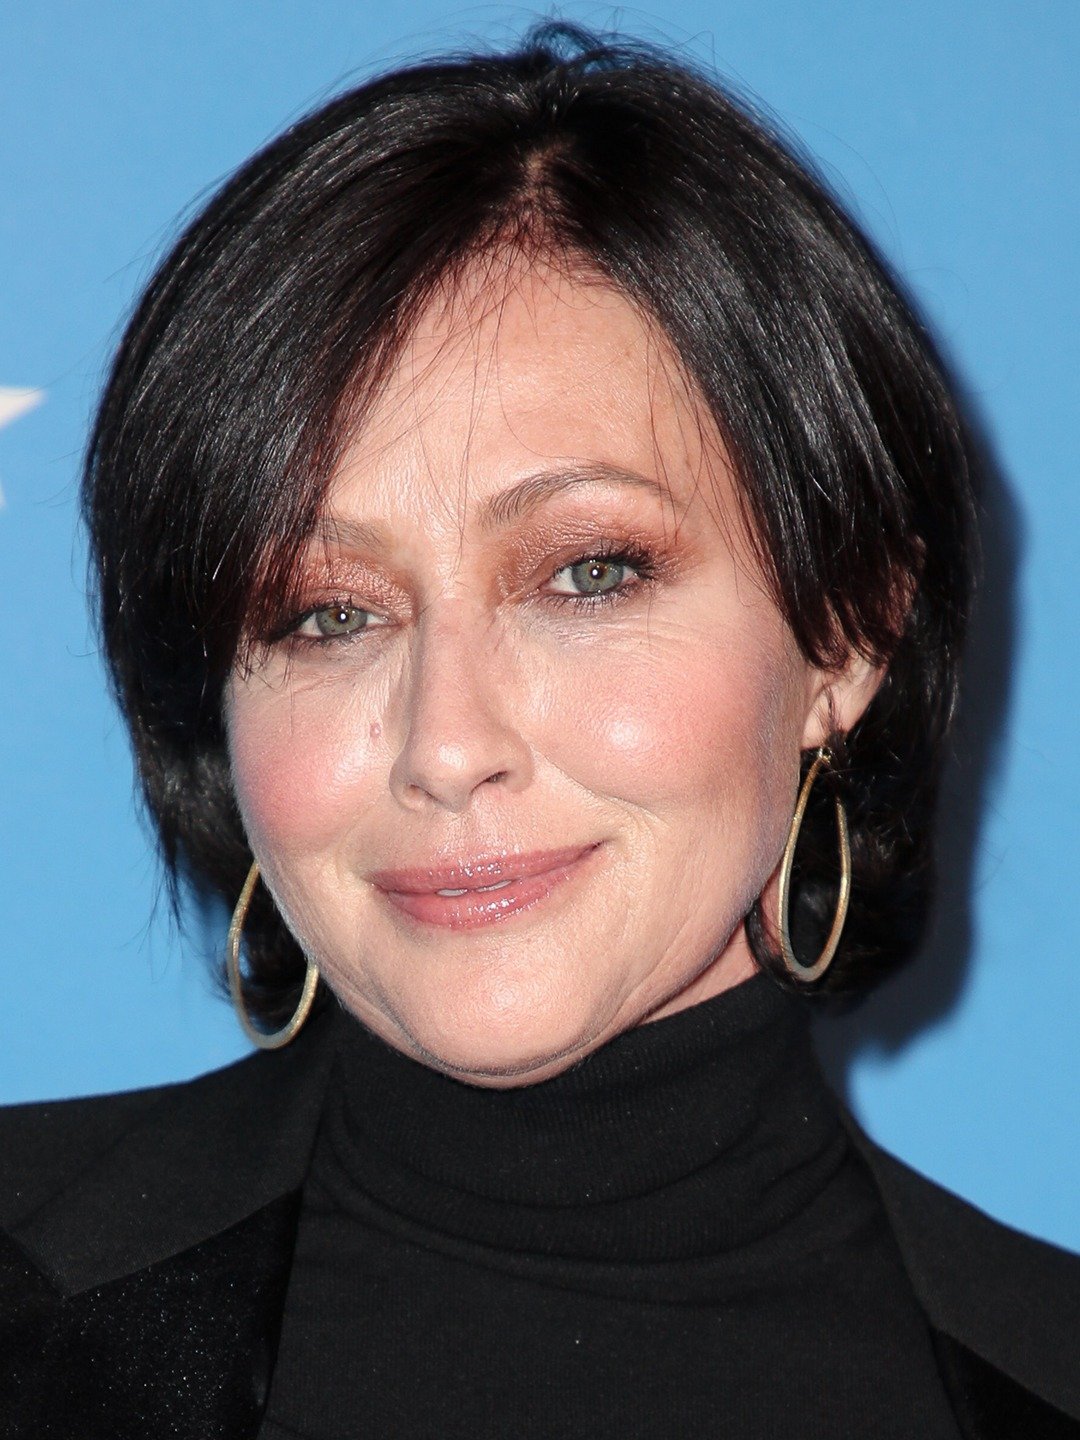 How tall is Shannen Doherty?